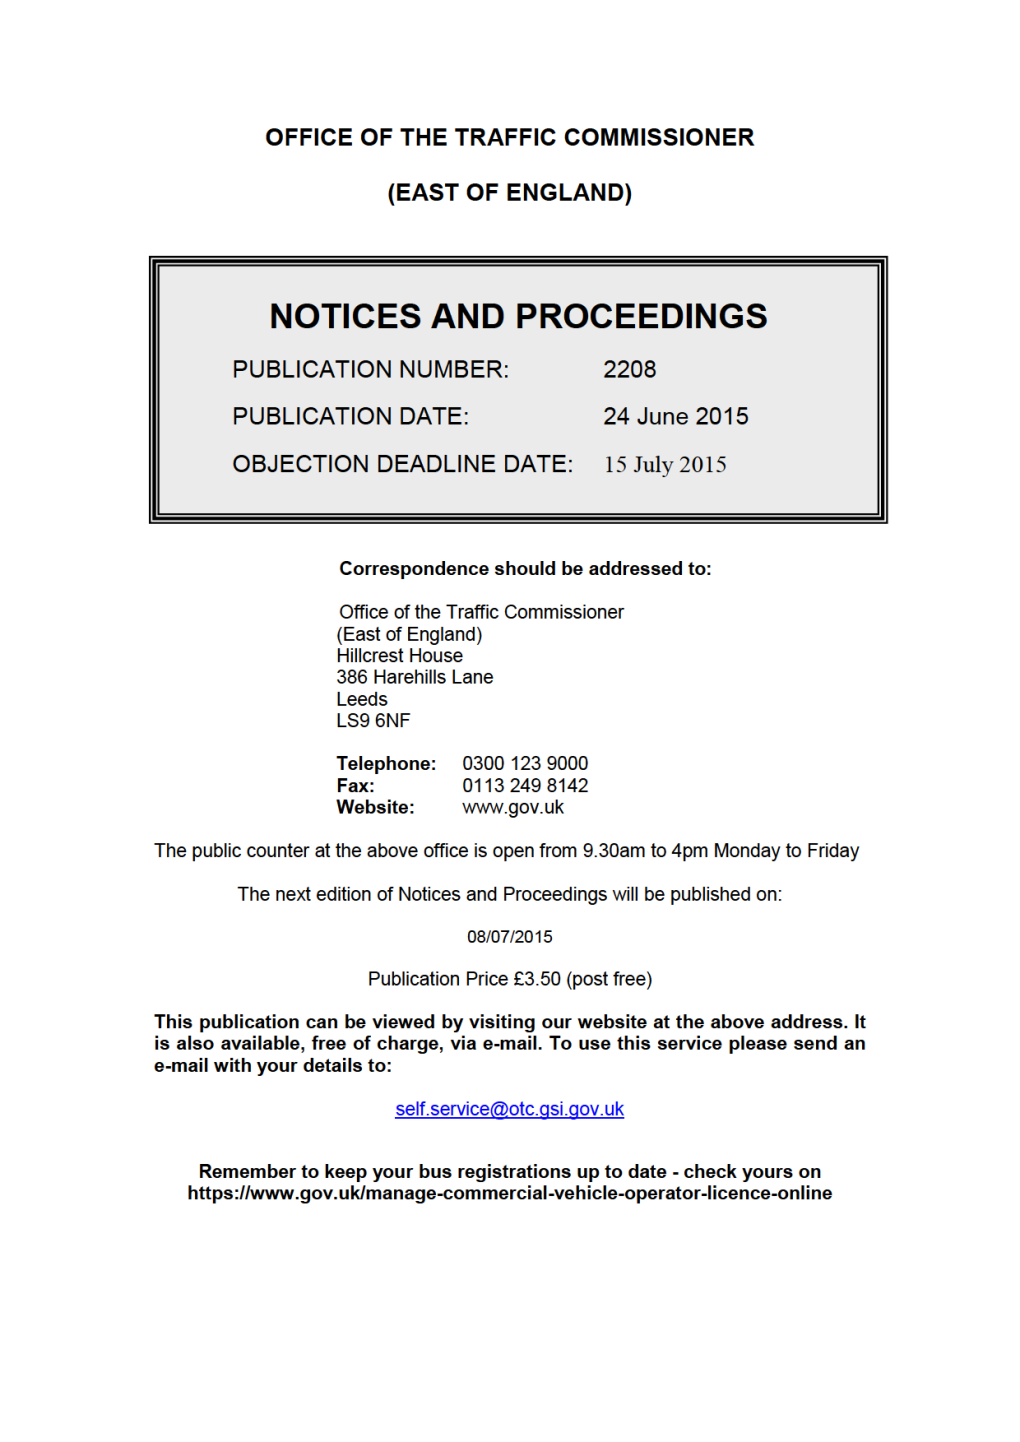 NOTICES and PROCEEDINGS 24 June 2015